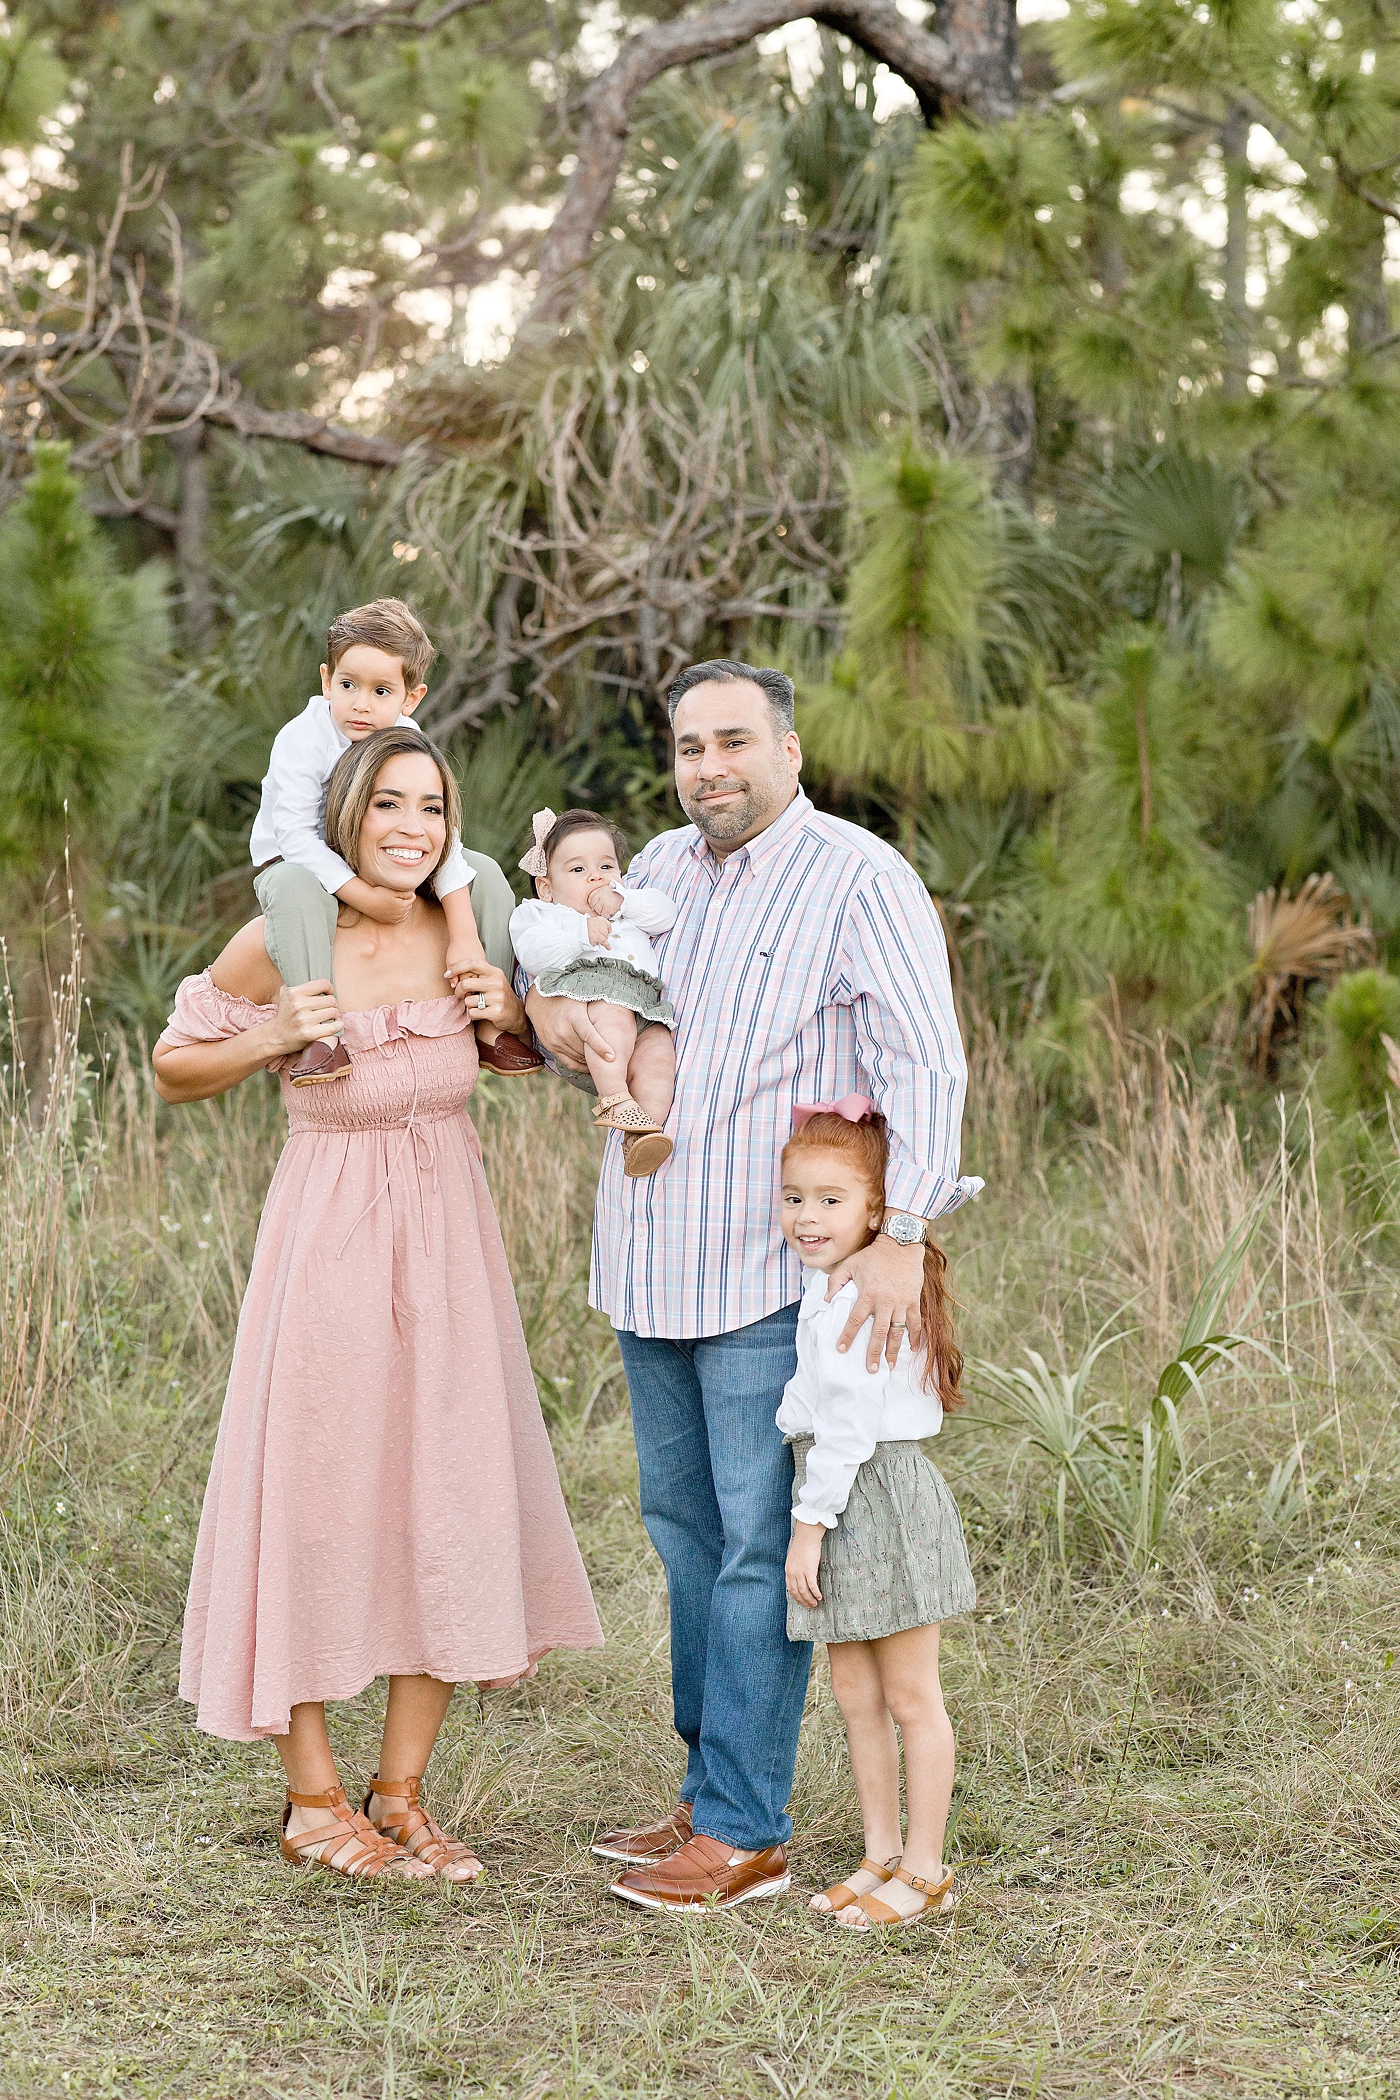 Family of five takes portrait in Miami field. Photo by Ivanna Vidal Photography.